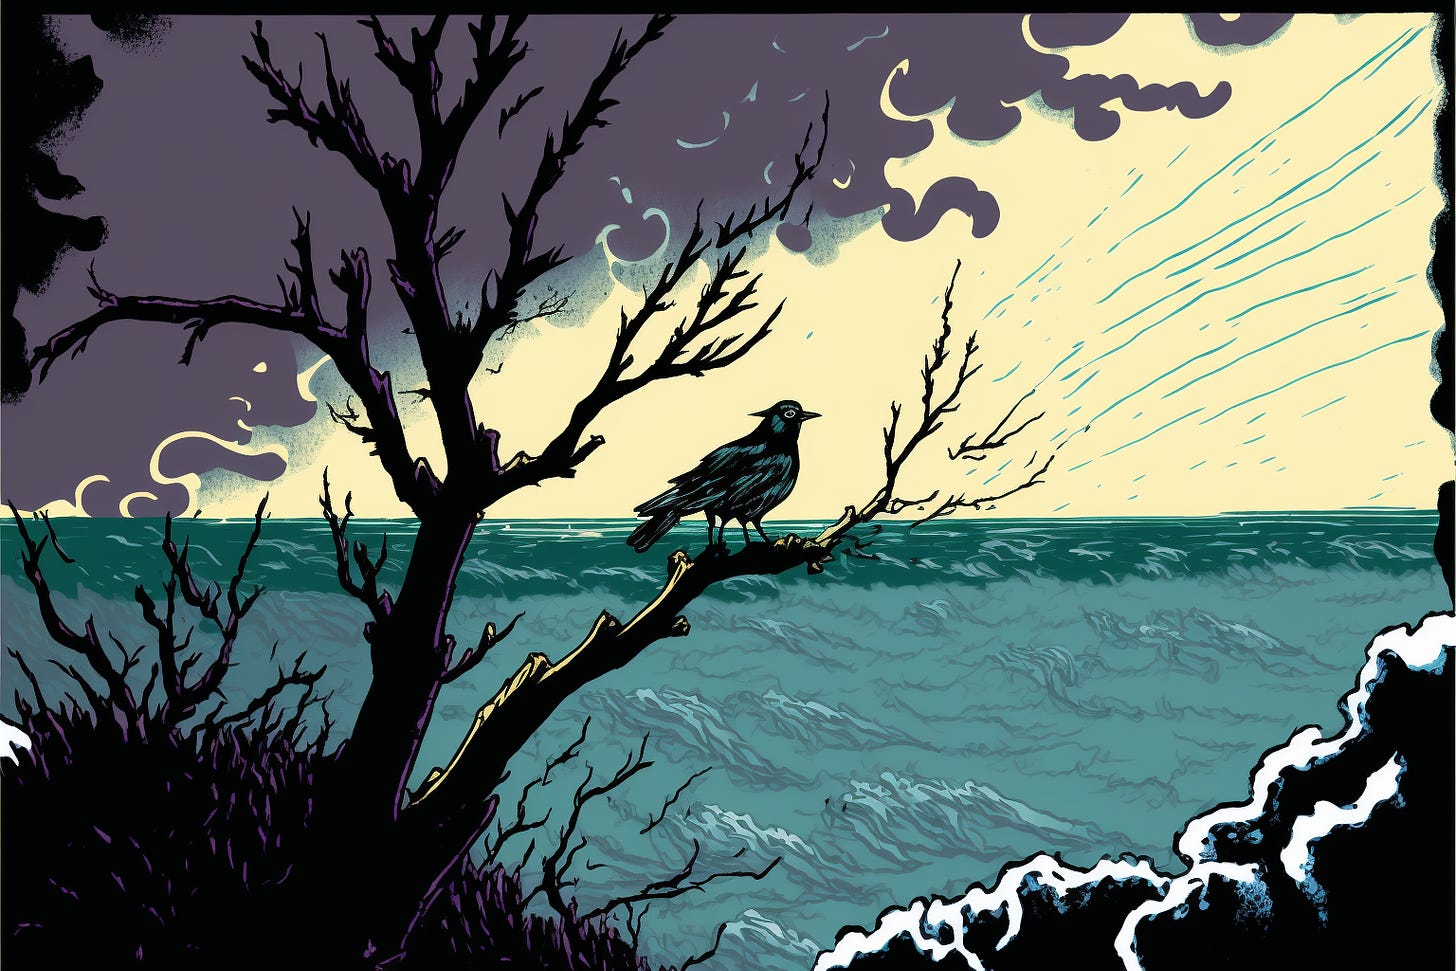 silhouette of a bird on a branch looking out over a turbulent ocean, graphic novel 